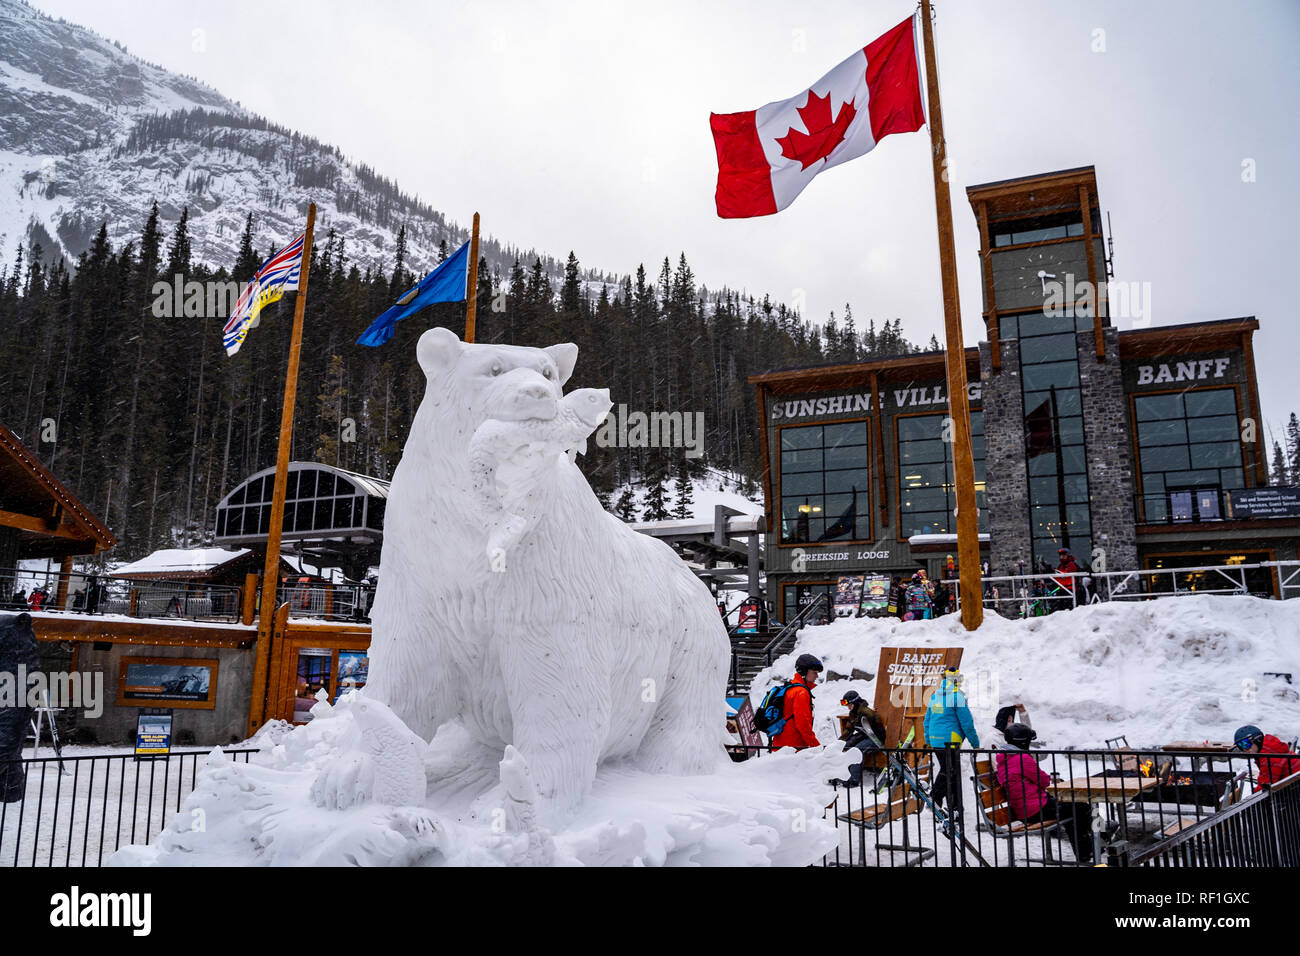 Banff, Alberta Canada - Janurary 19, 2019: Sunshine Village ski area during Banff Snow Days, with snow carving sculpture of a bear in front of the lod Stock Photo